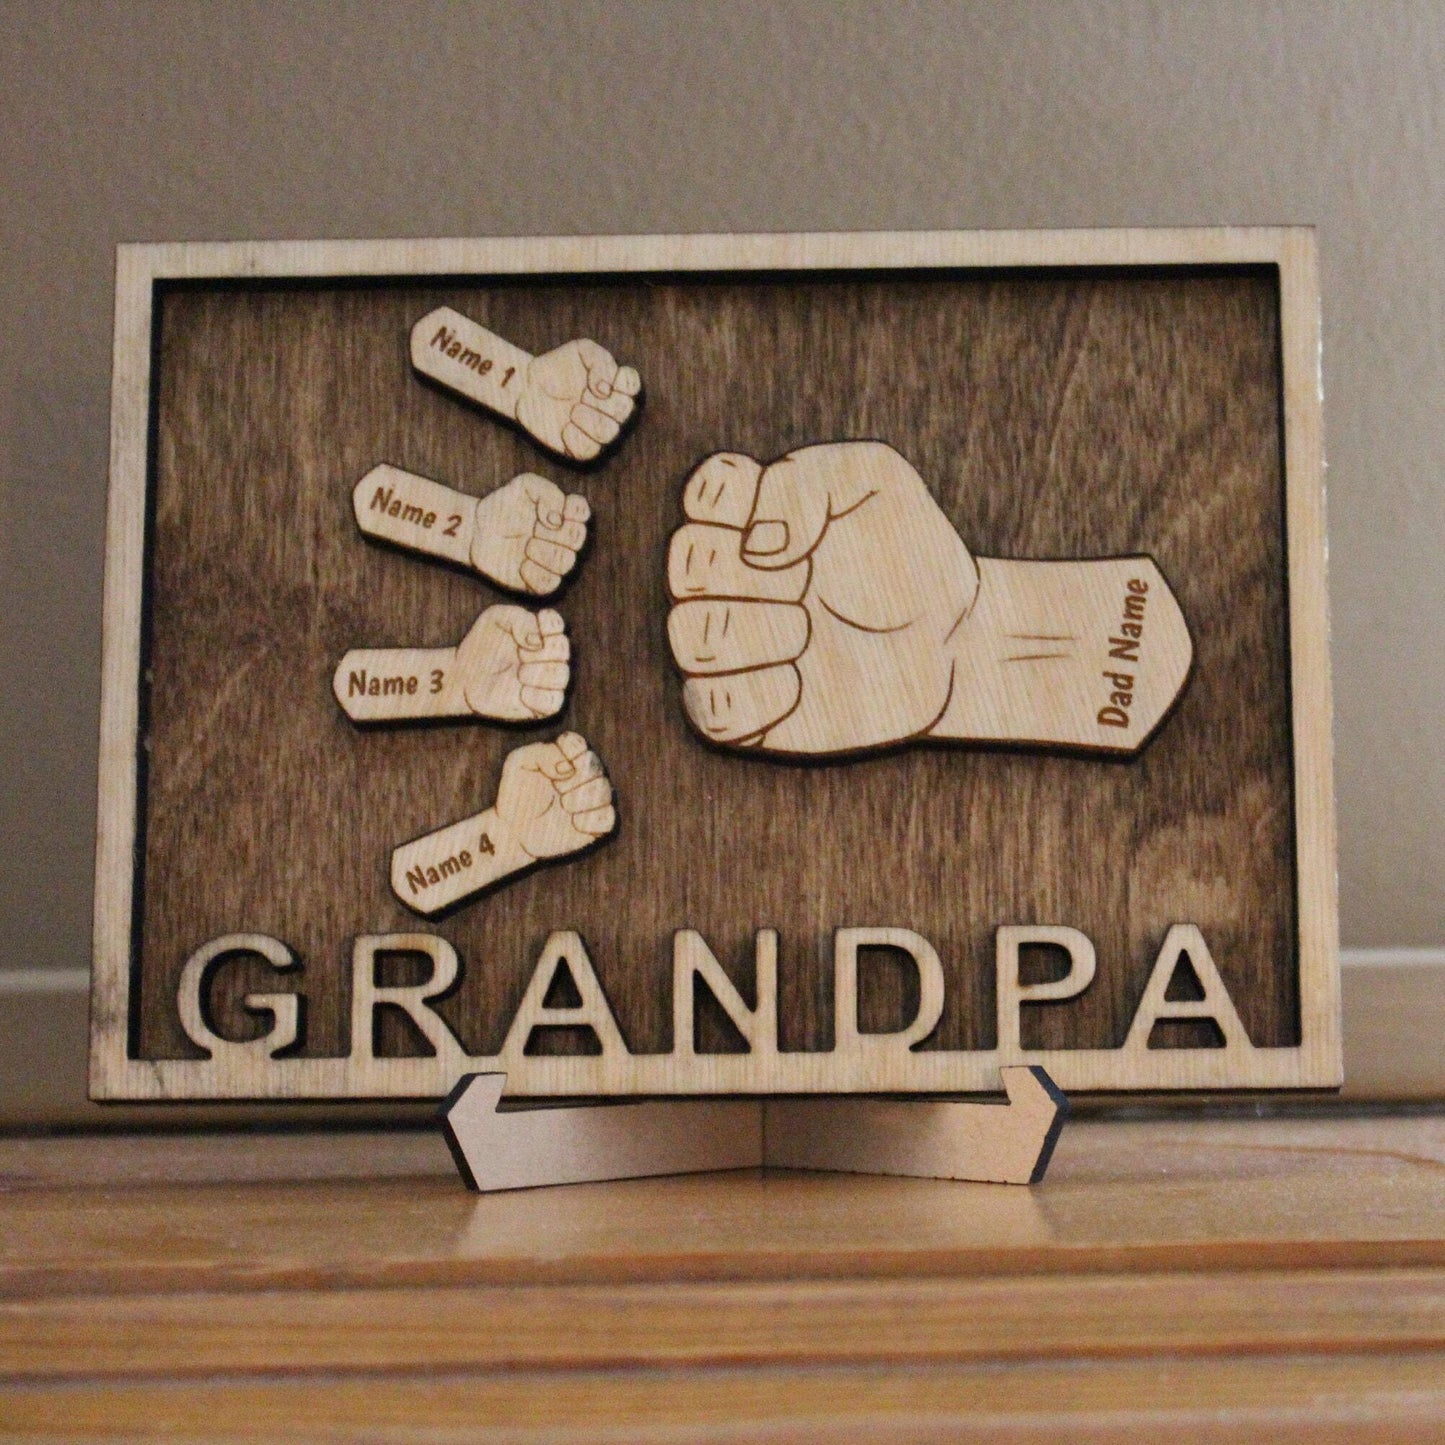 Father's Day-Personalized Fist Bump Plaque